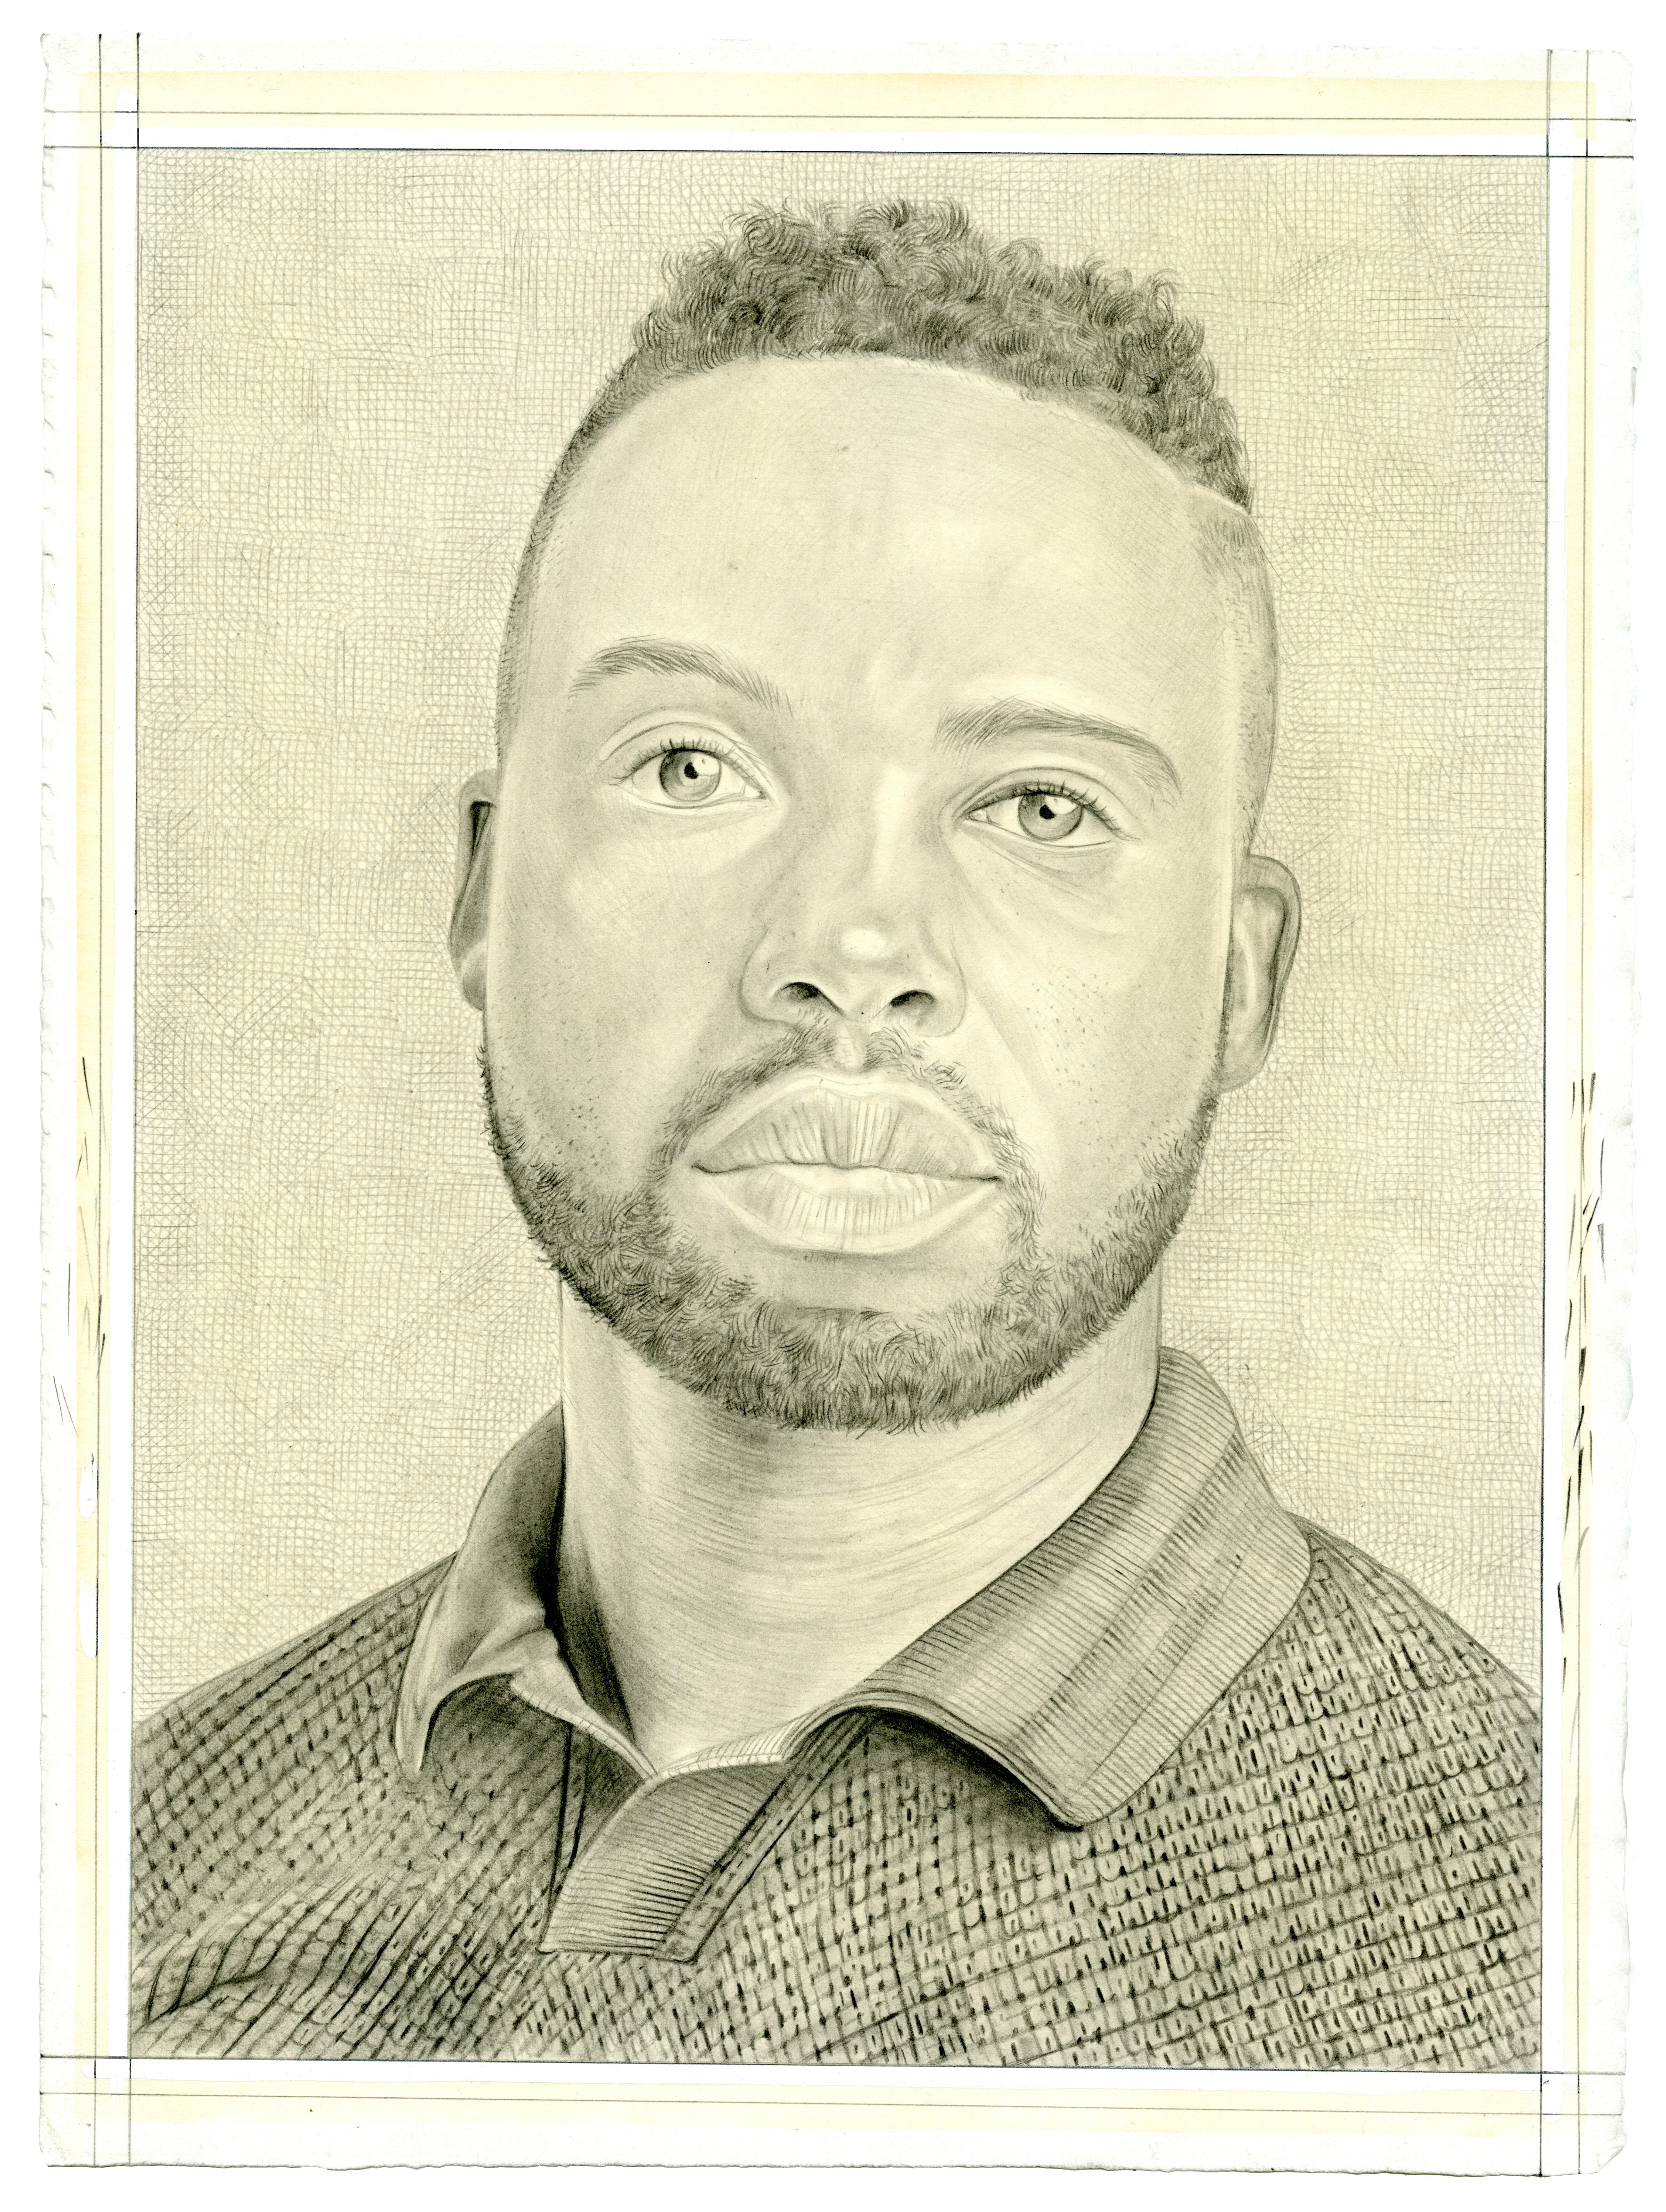 Portrait of Adam Pendleton. Pencil on paper by Phong Bui. From a photo by Taylor Dafoe.